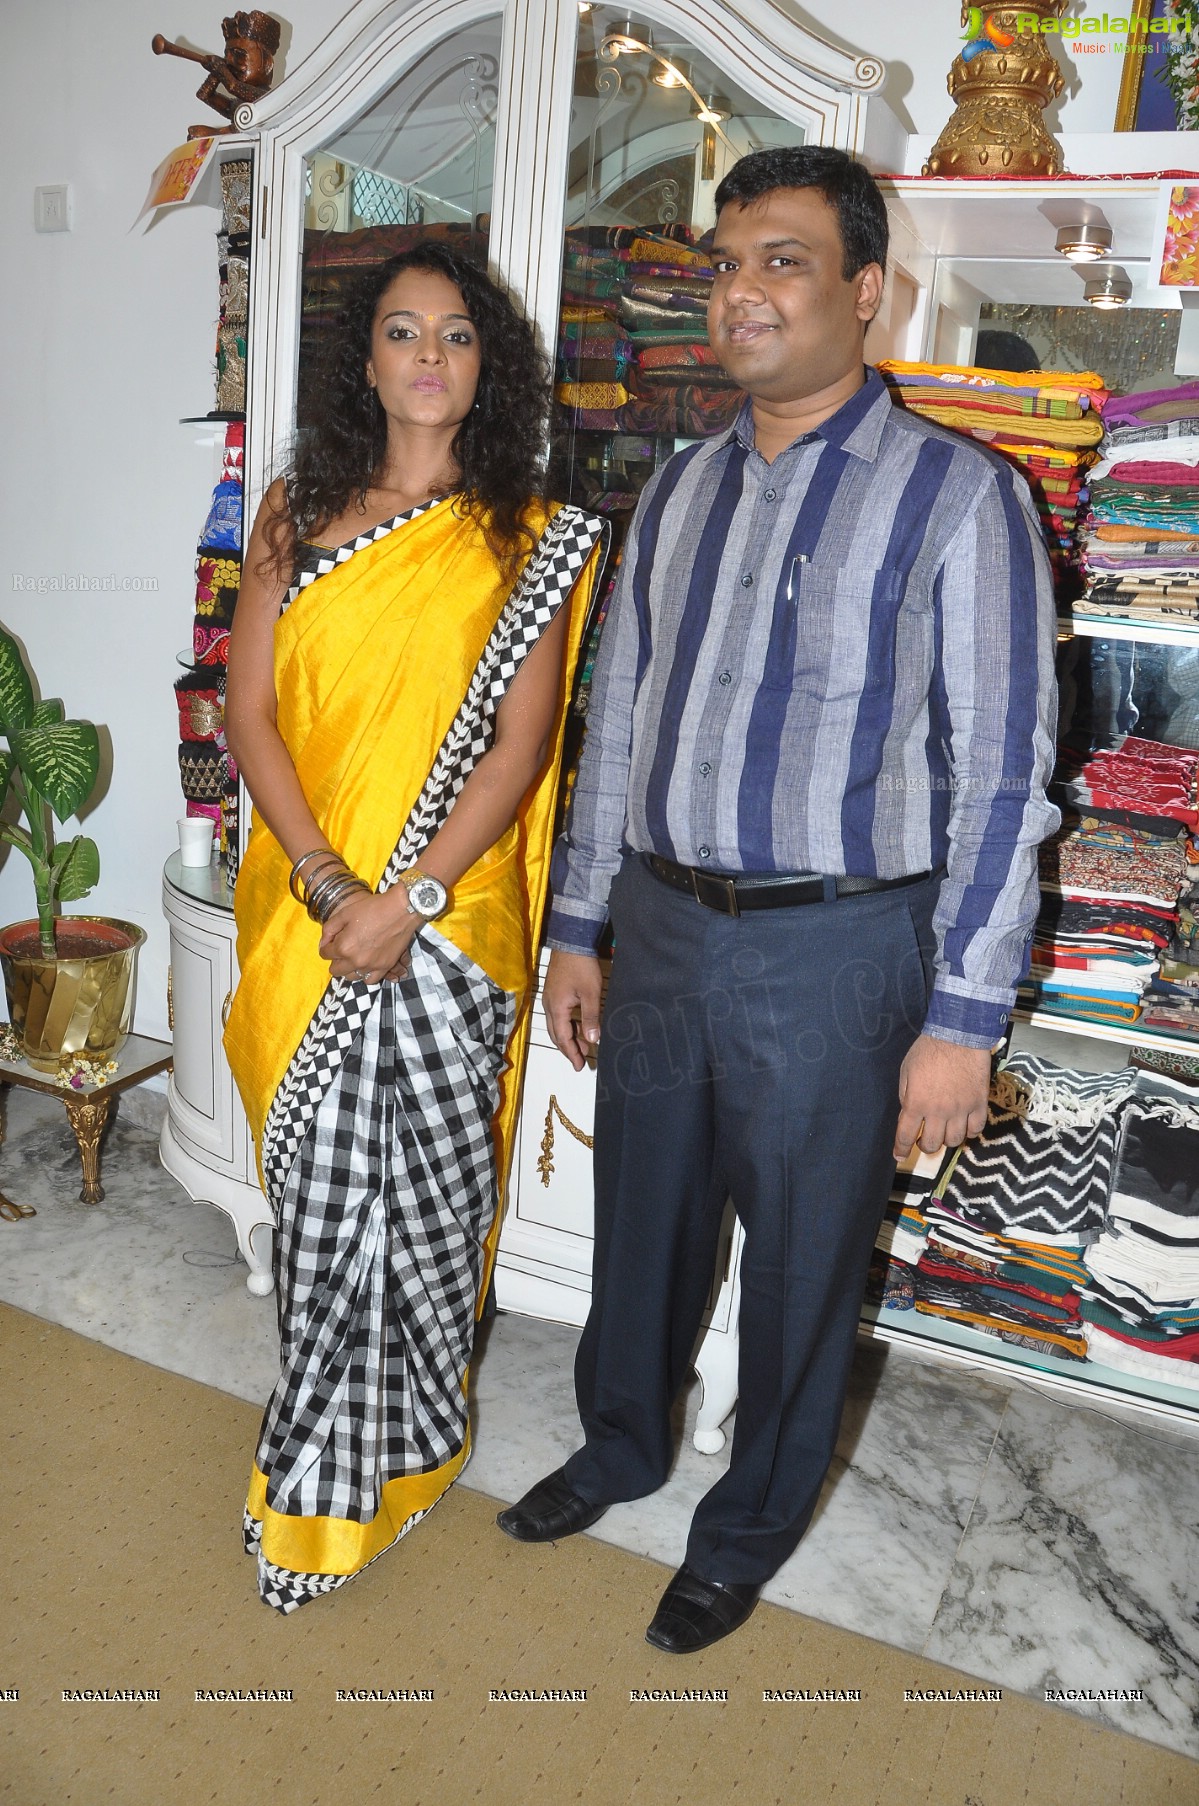 Grand Sale at Singhanias Store, Hyderabad